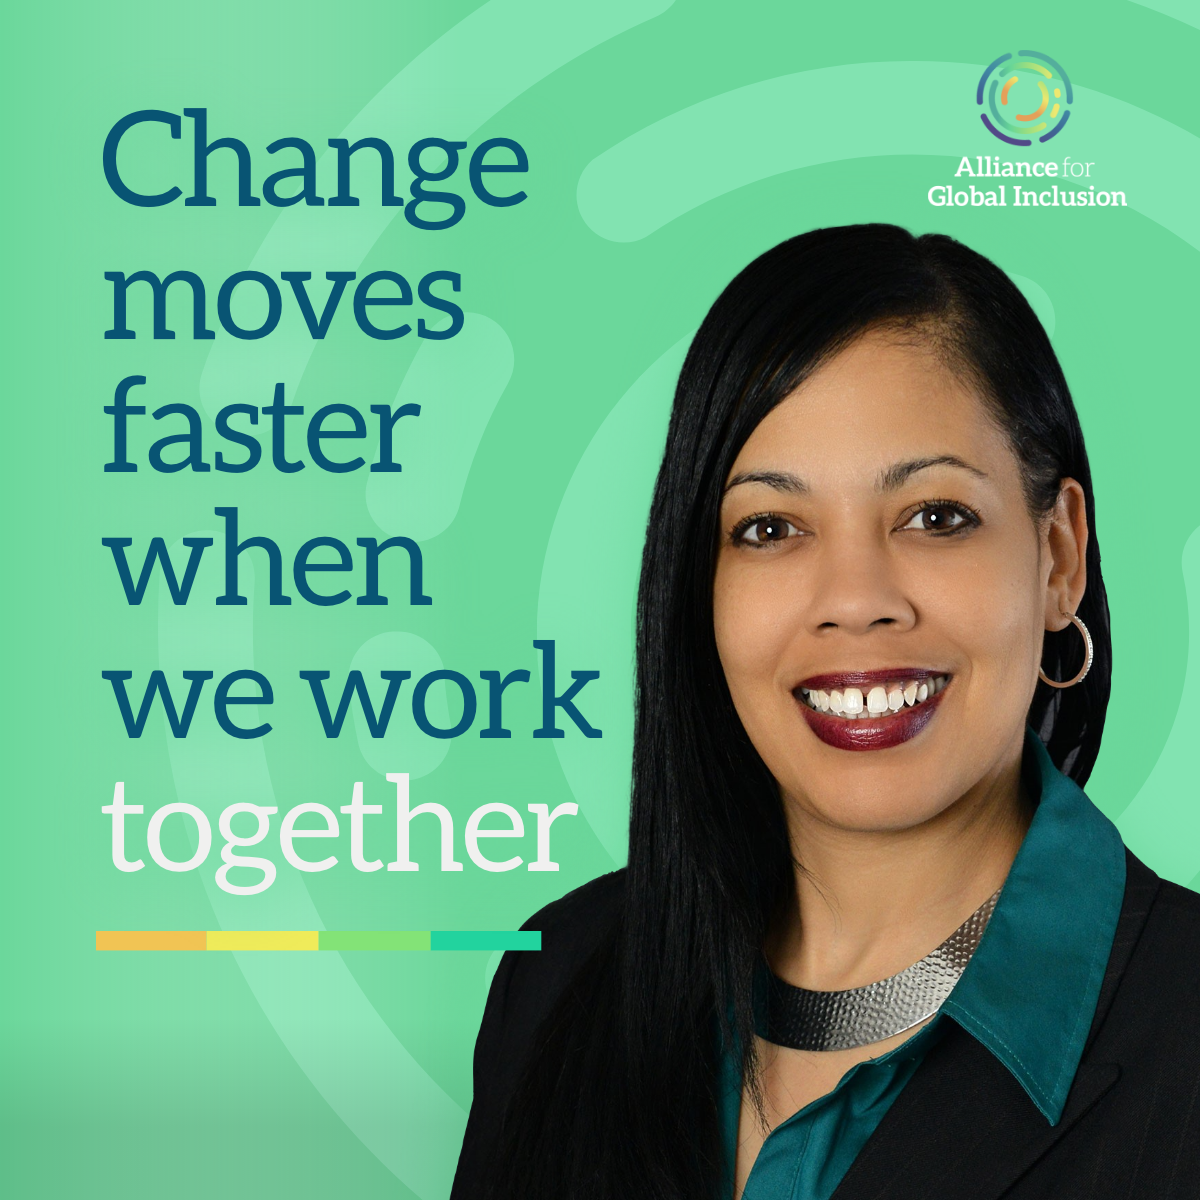 Photo of Dawn Jones, Chief Diversity & Inclusion Officer and VP of Social Impact at Intel, alongside the text "Change moves faster when we work together" and the Alliance For Global Inclusion combination mark, square